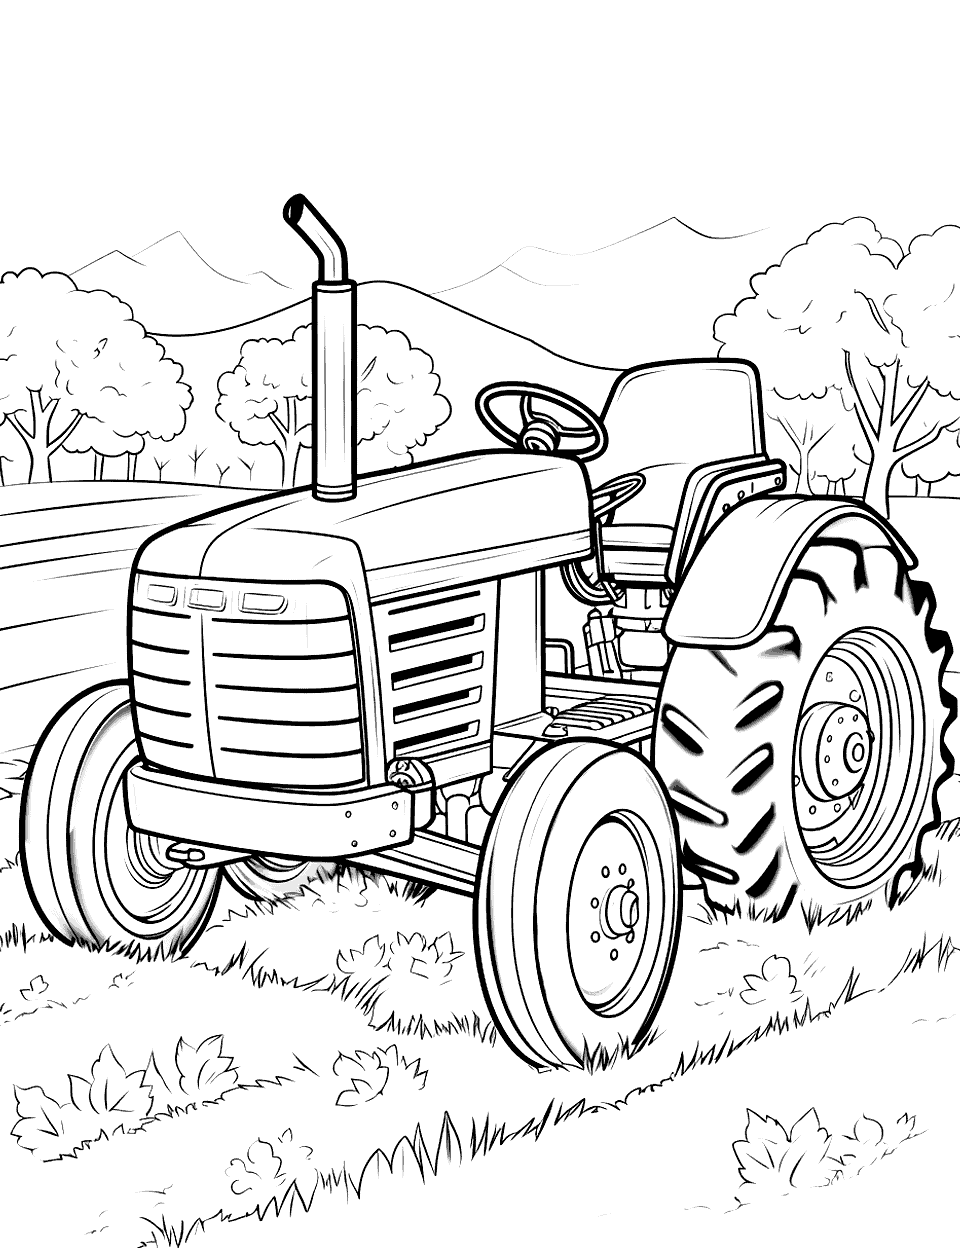 Vintage Tractor in the Fall Coloring Page - An old, vintage tractor with a backdrop of autumn leaves.